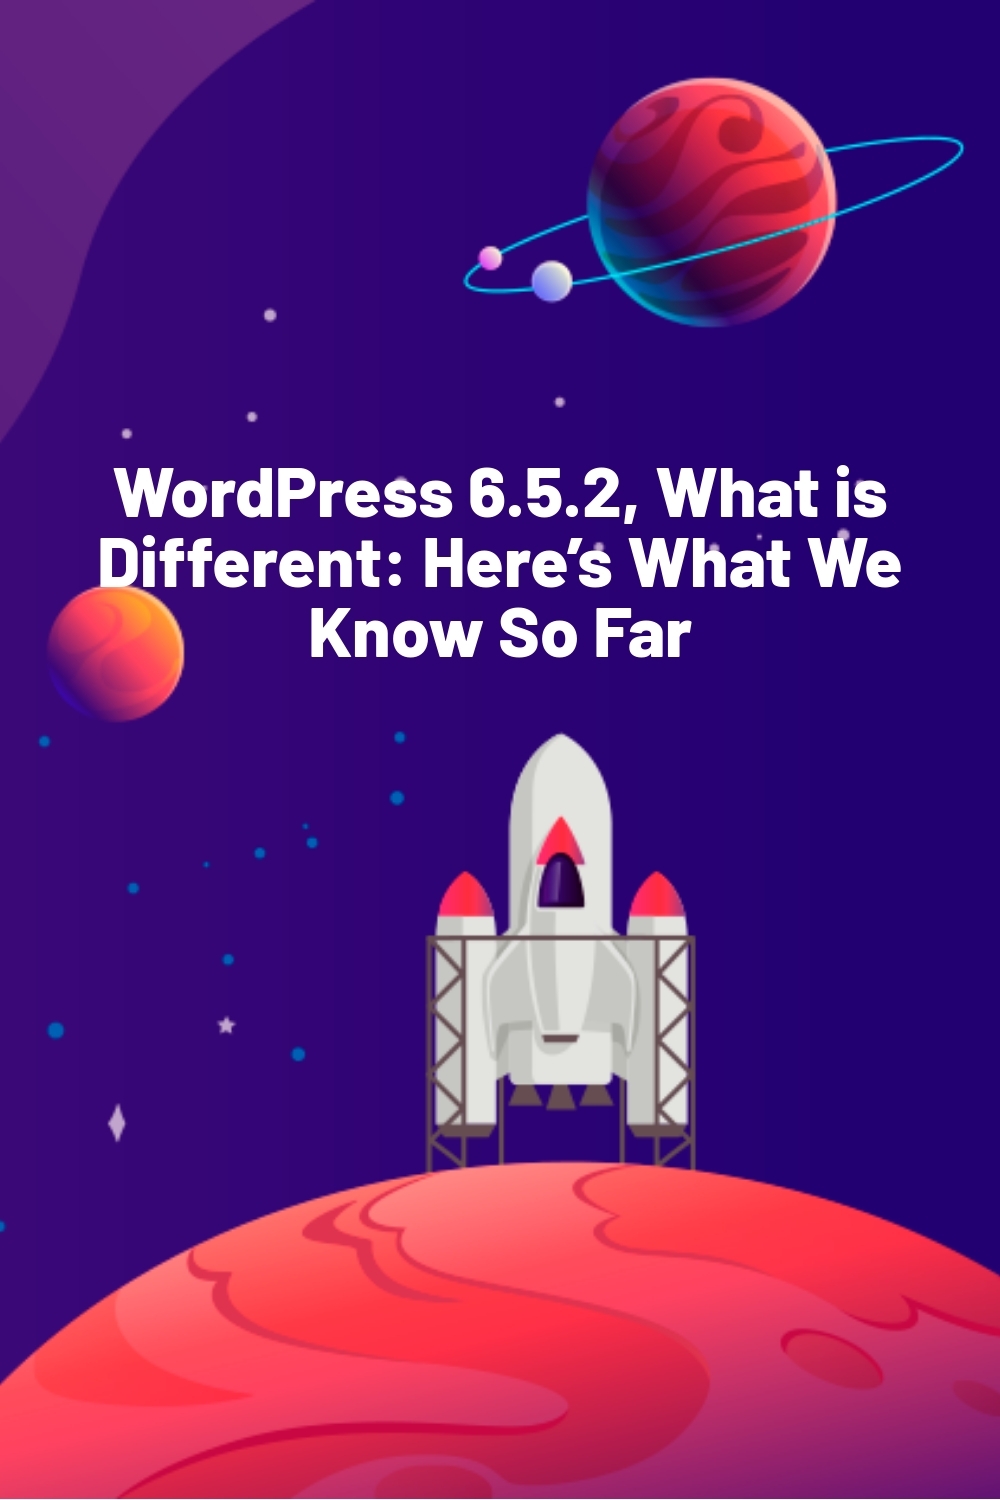 WordPress 6.5.2, What is Different: Here’s What We Know So Far